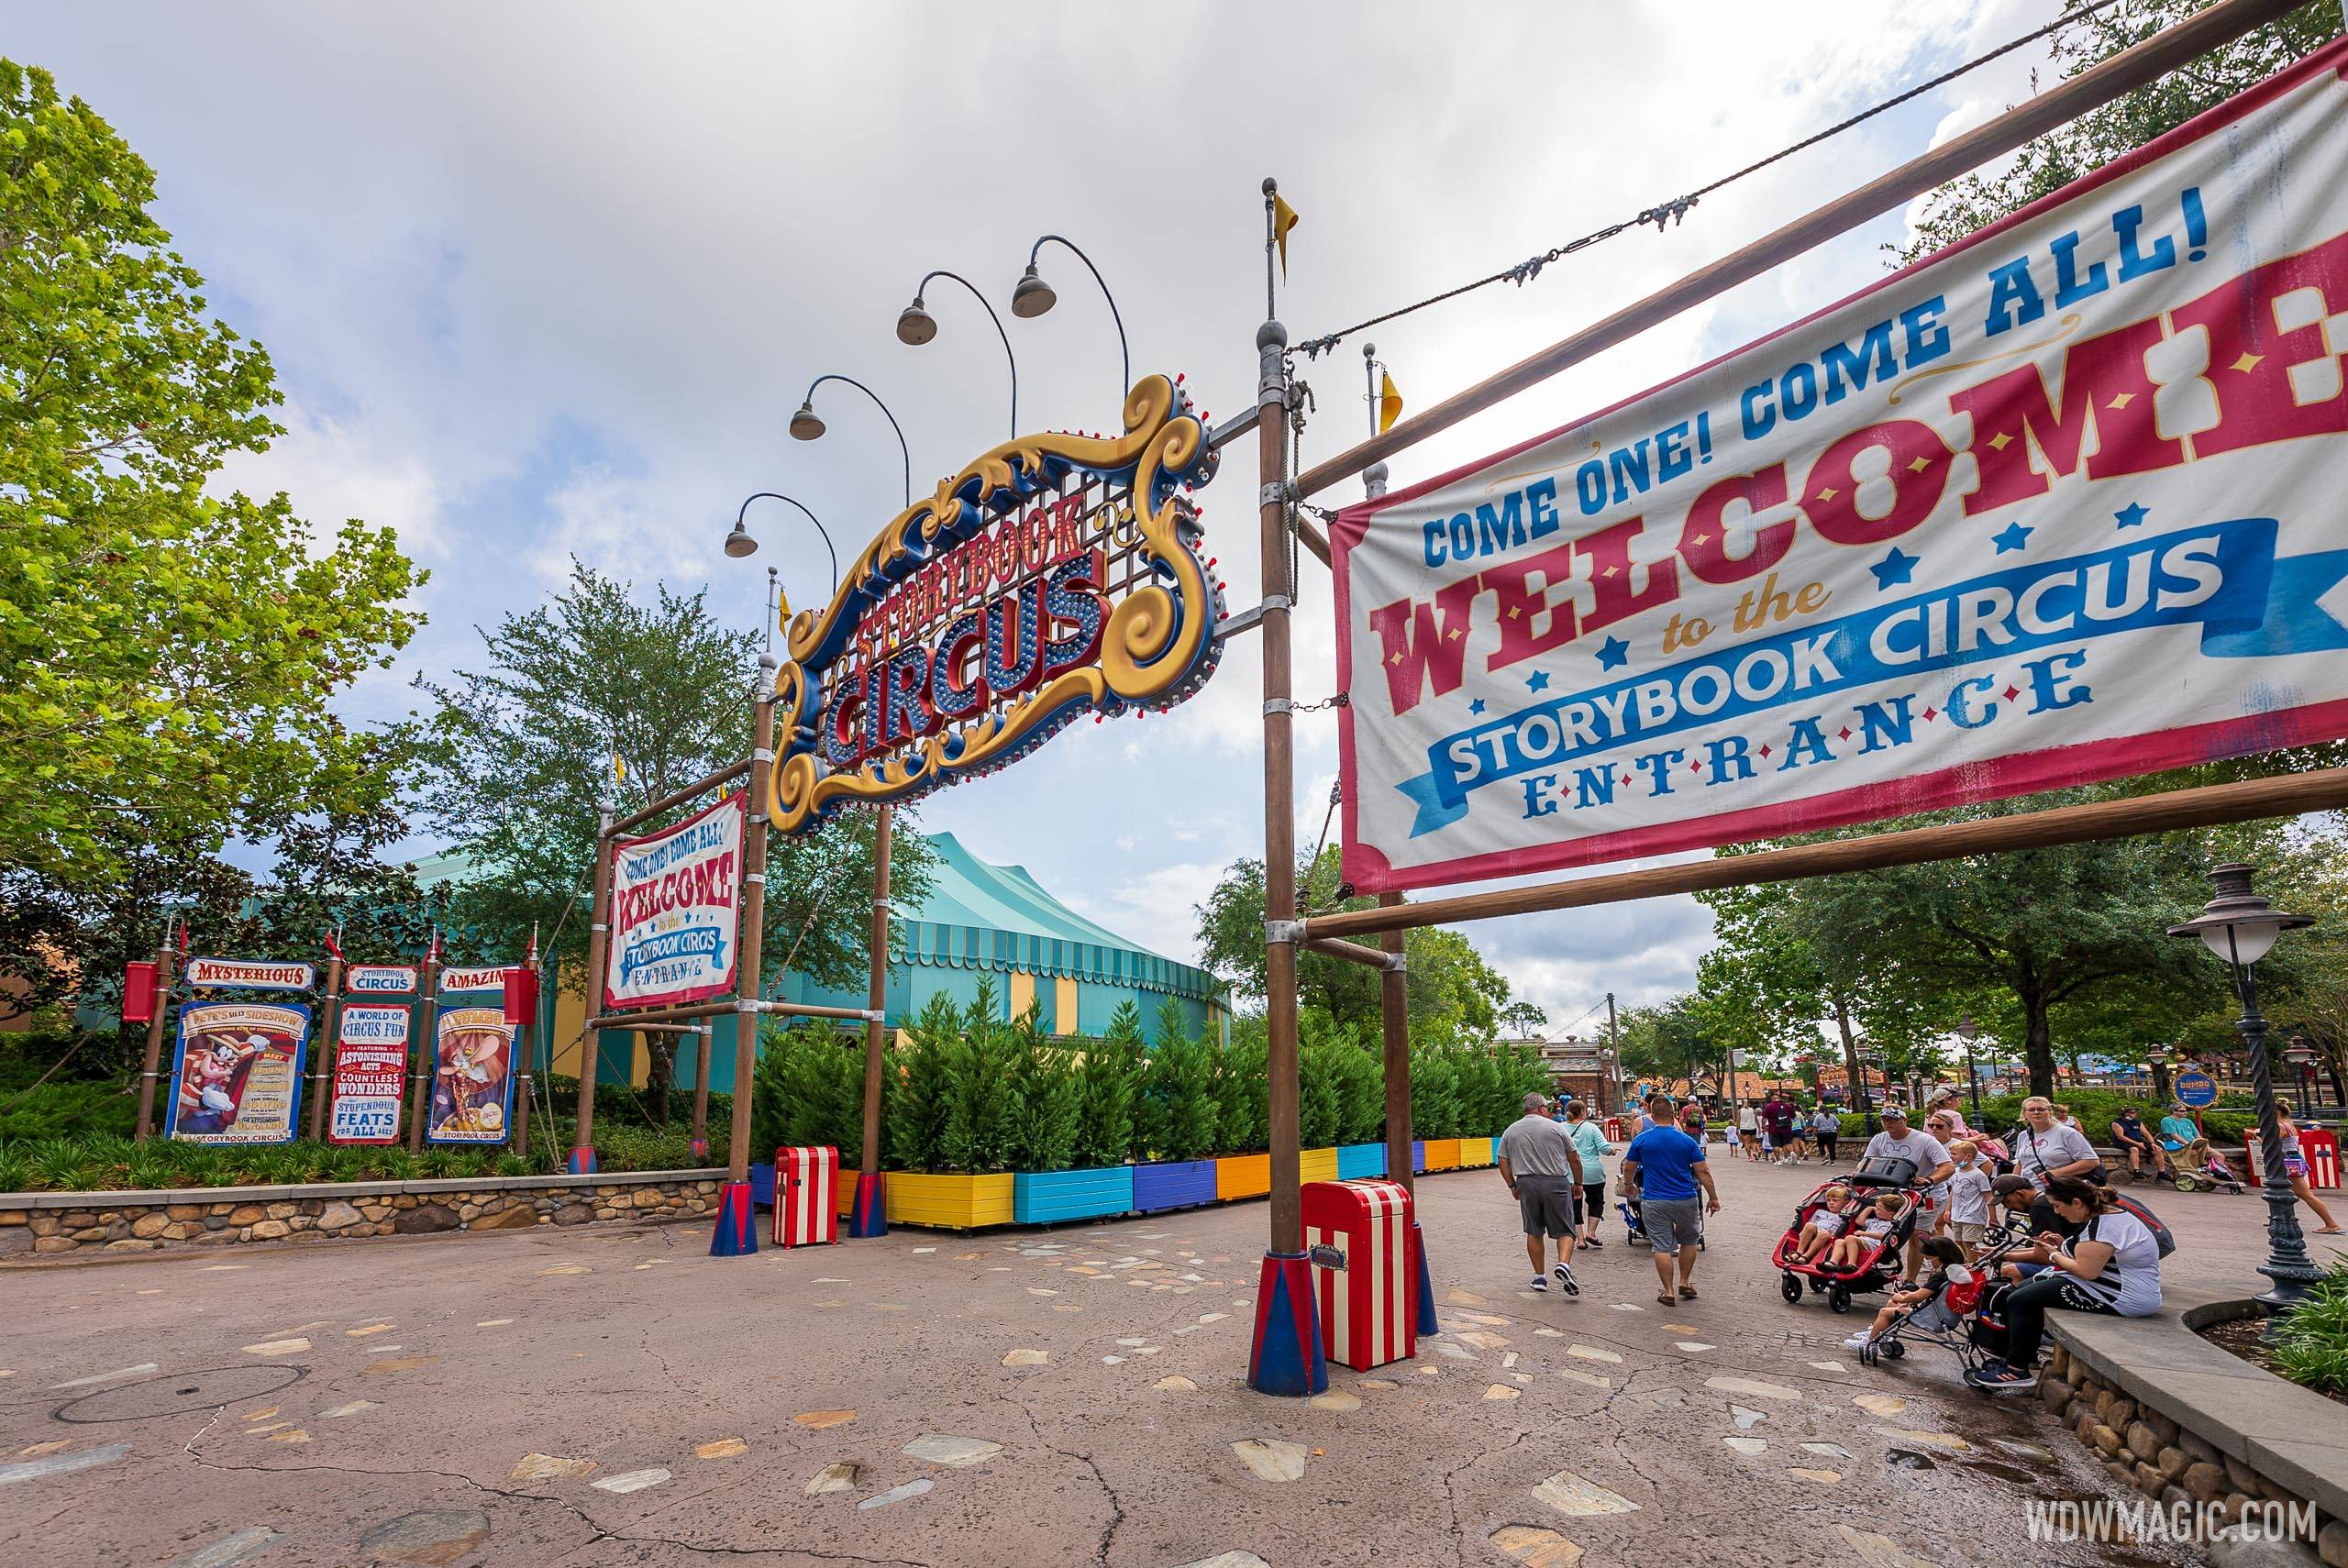 Pete's Silly Sideshow in Storybook Circus at Magic Kingdom remains closed